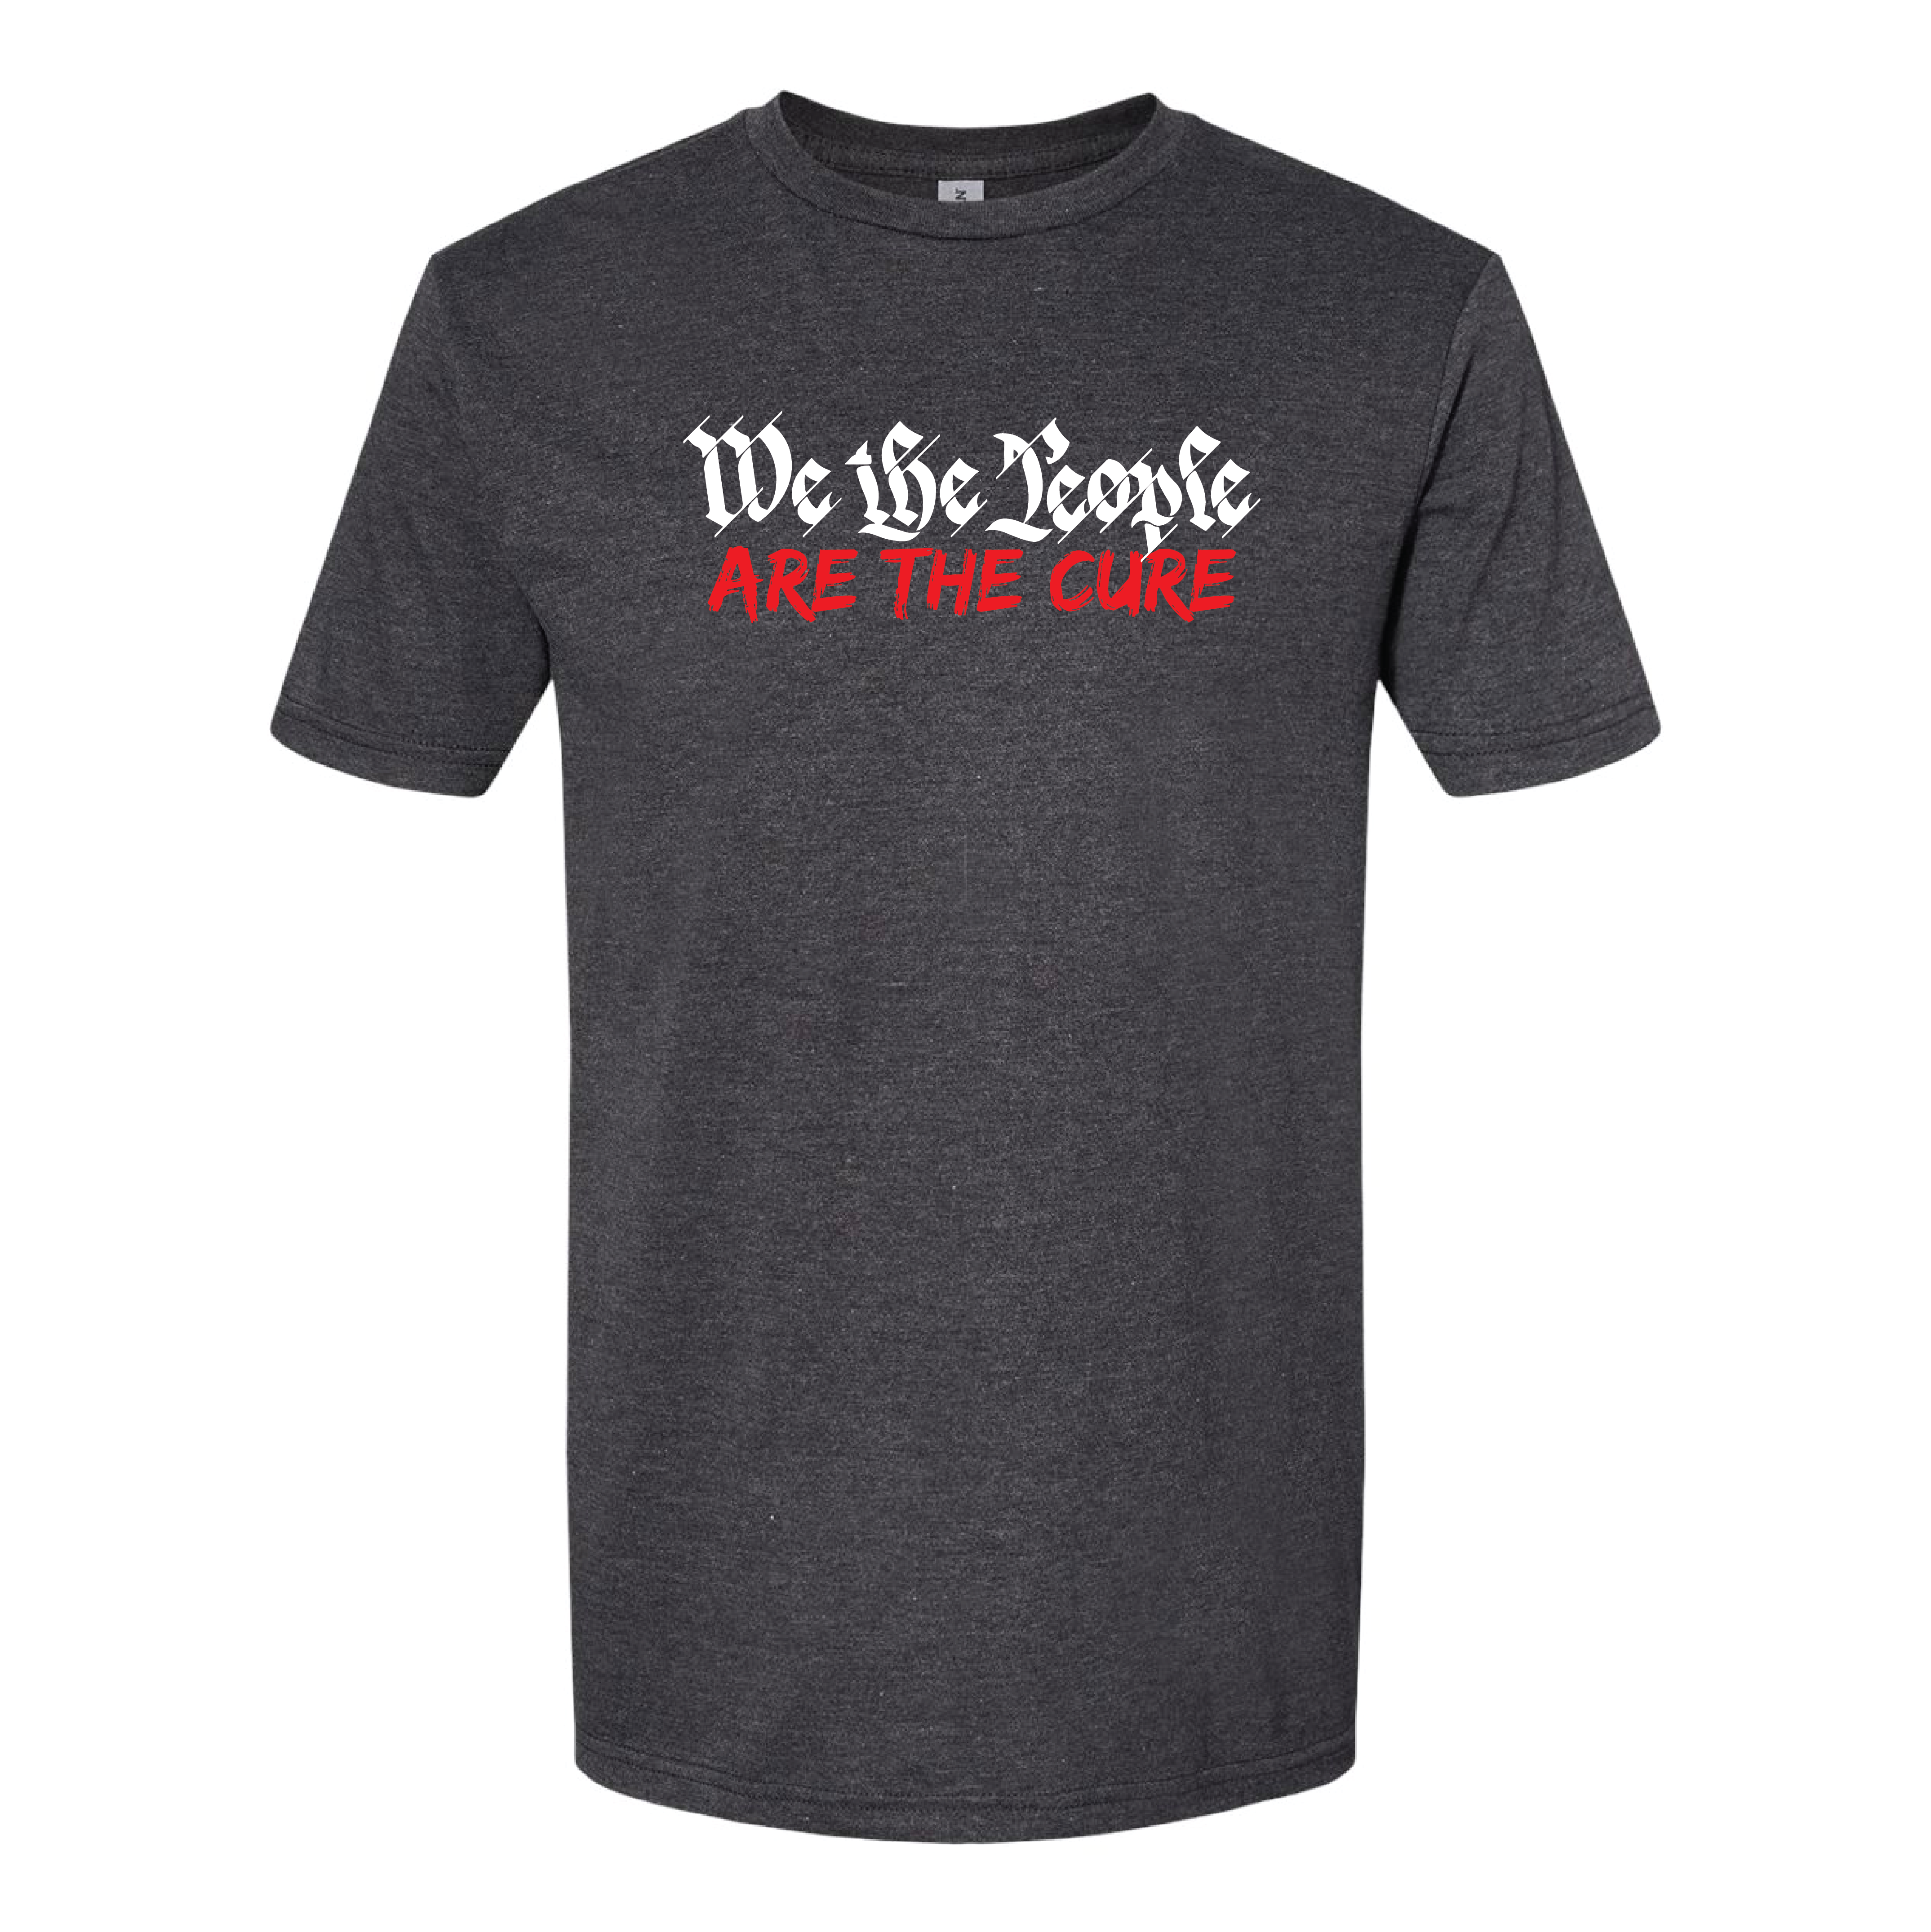 We The People Are The Cure Unisex Tee